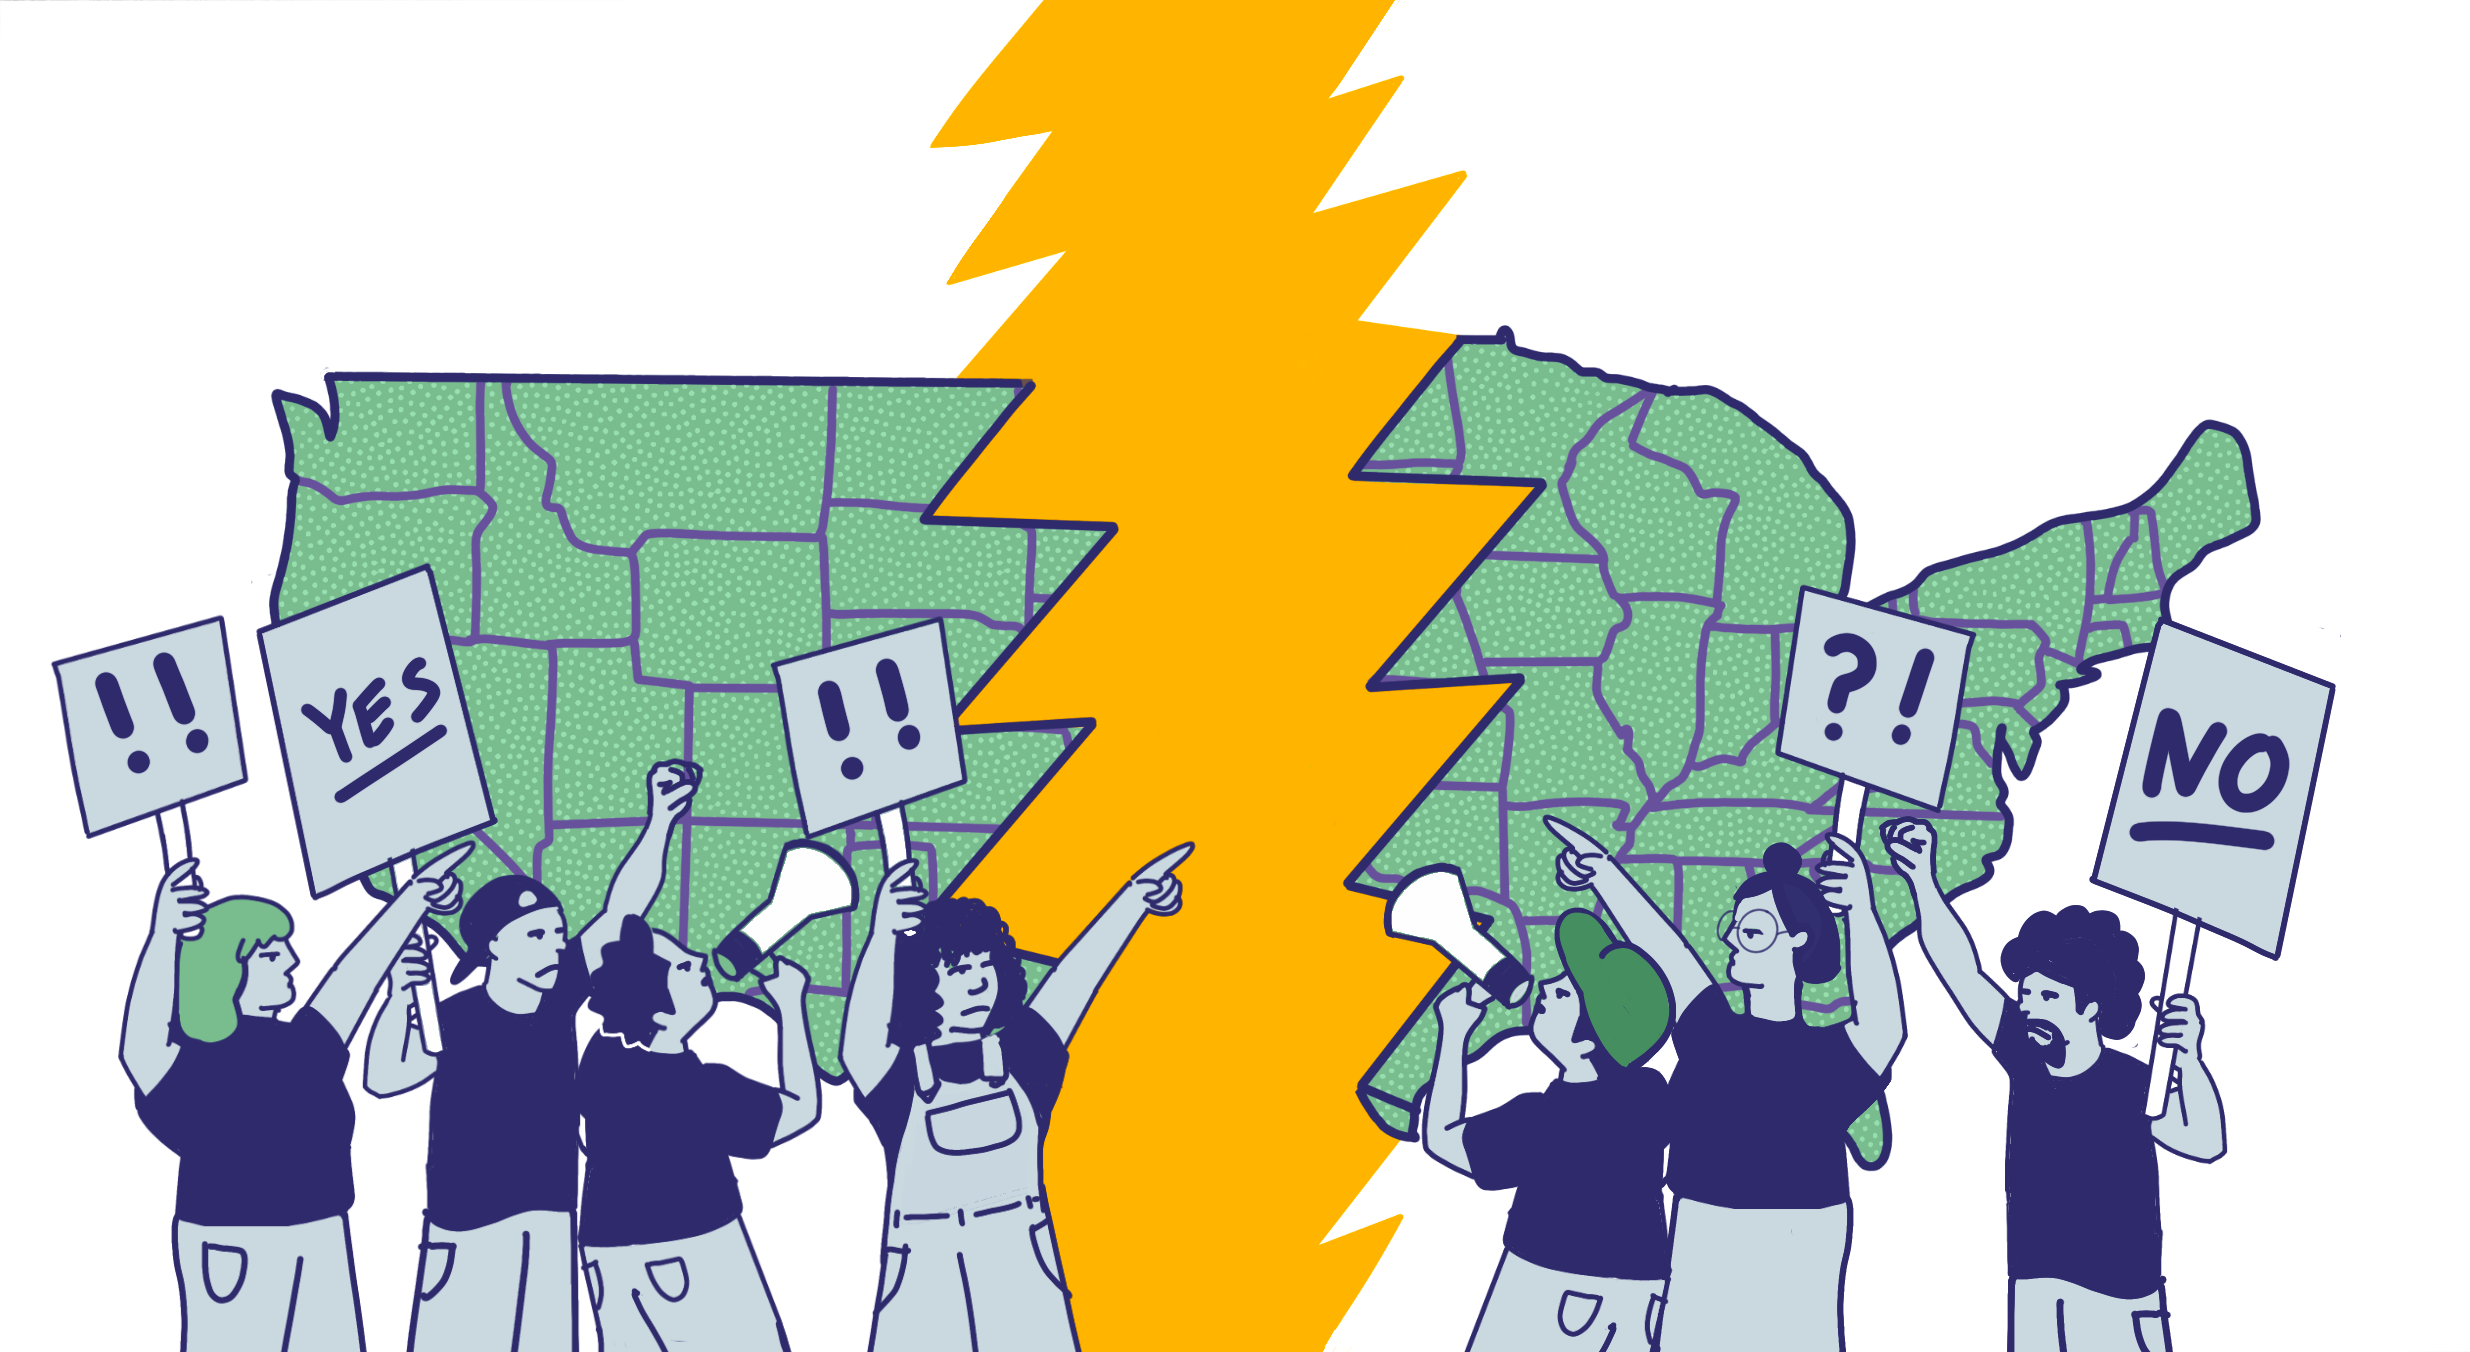 Cartoon drawing of protesters holding conflicting signs in front of a map of the continental USA split in two